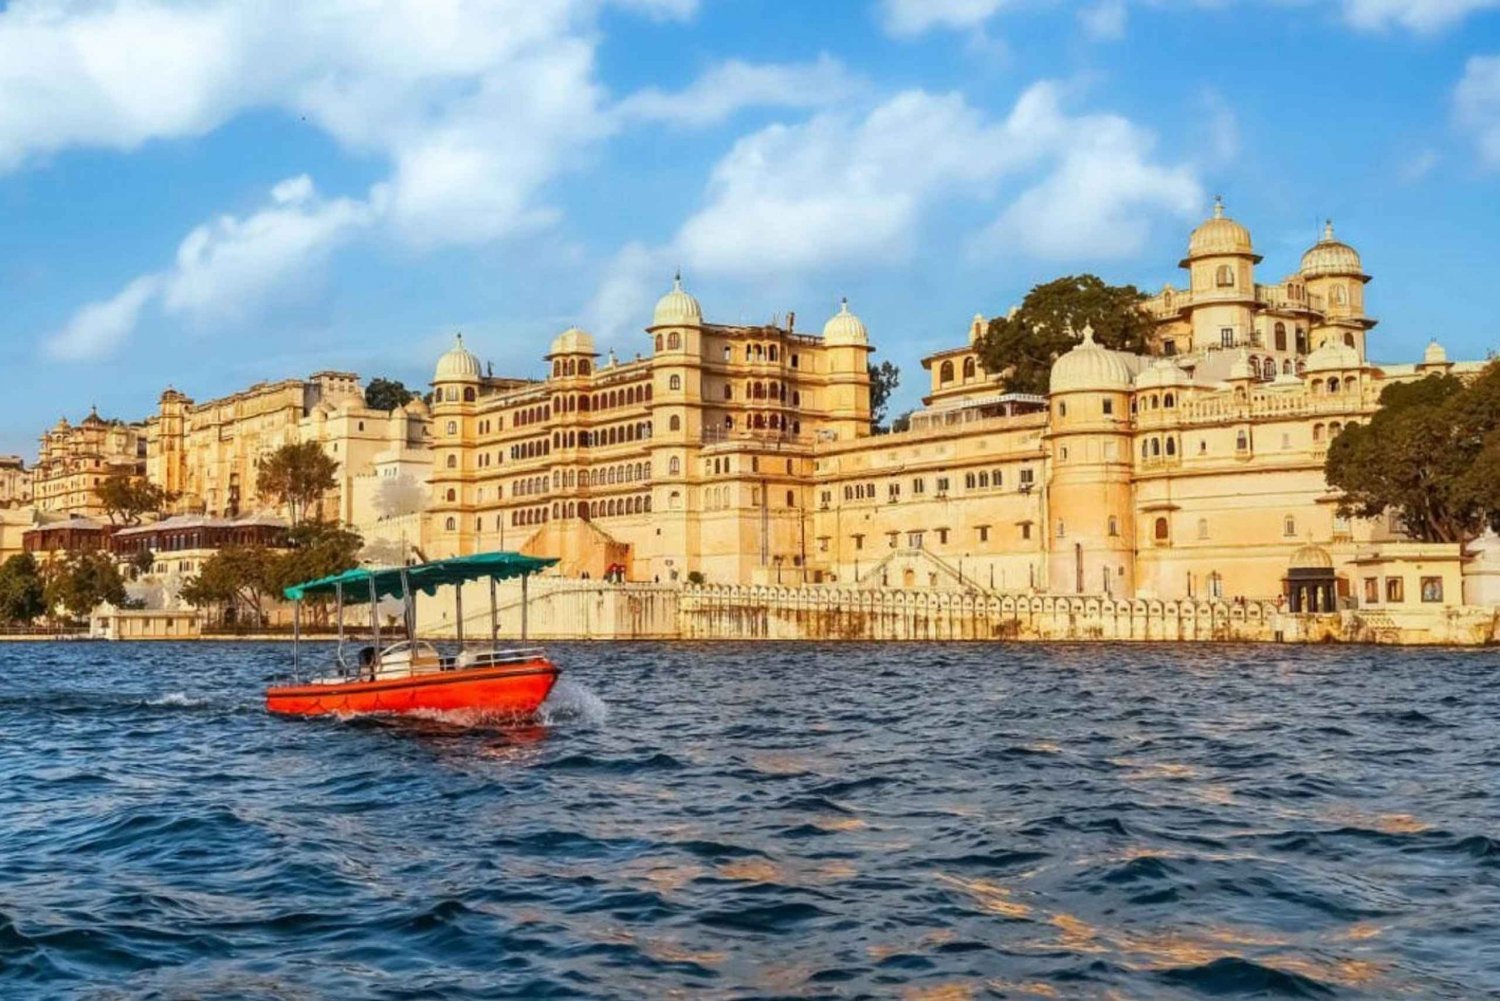 Udaipur : Full Day Private City Tour With Guide and Car